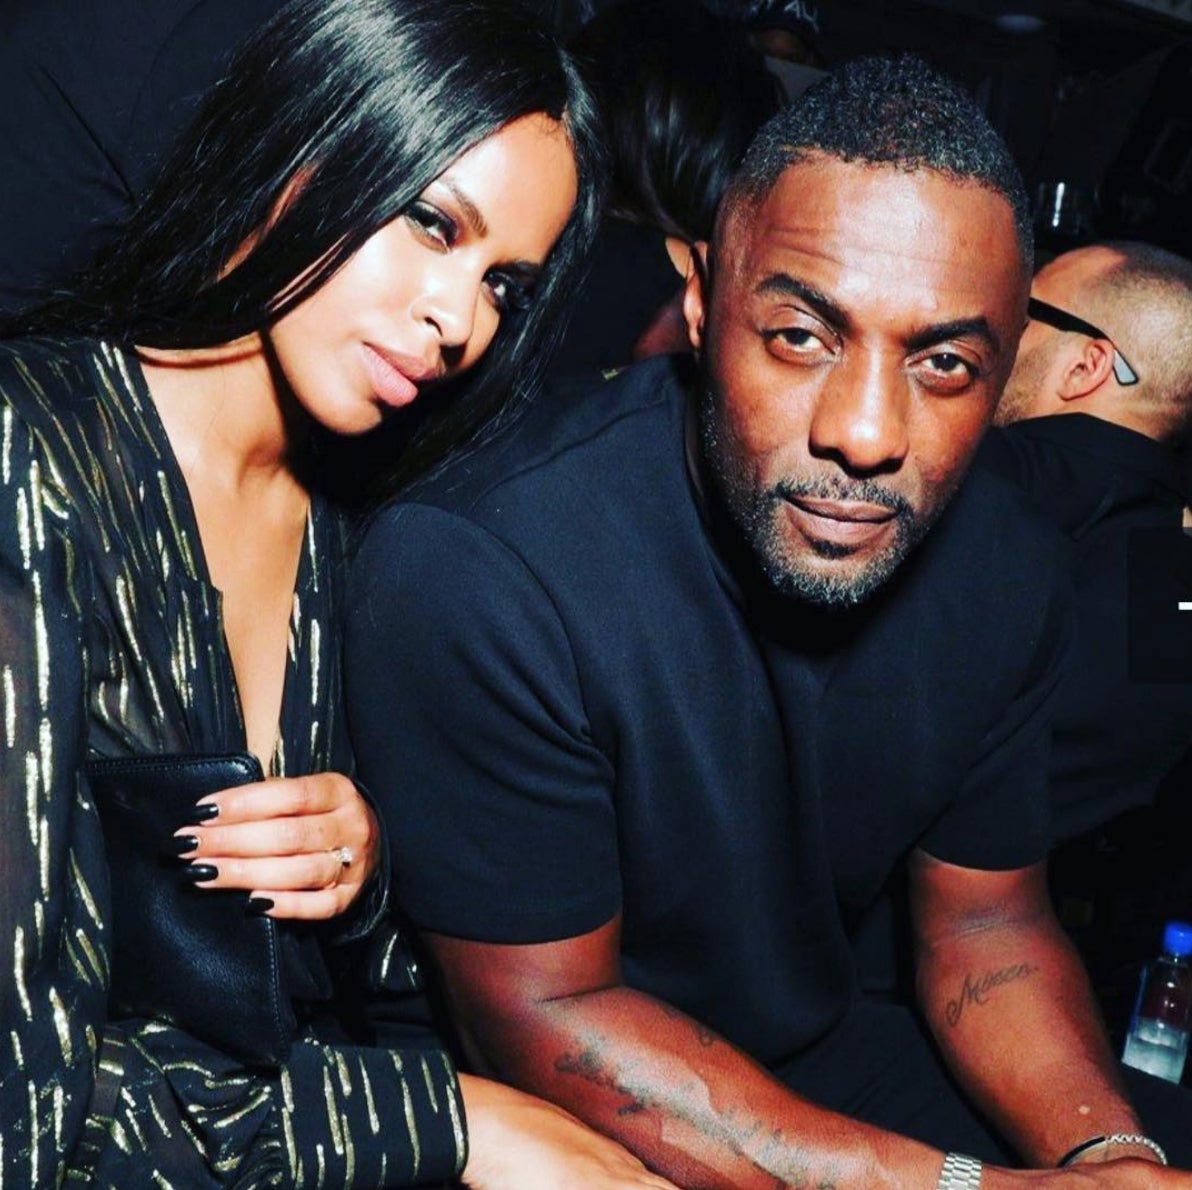 Date Night Goals: Idris Elba And Sabrina Dhowre Party At Jay Z And Beyonce’s OTRII Show In London